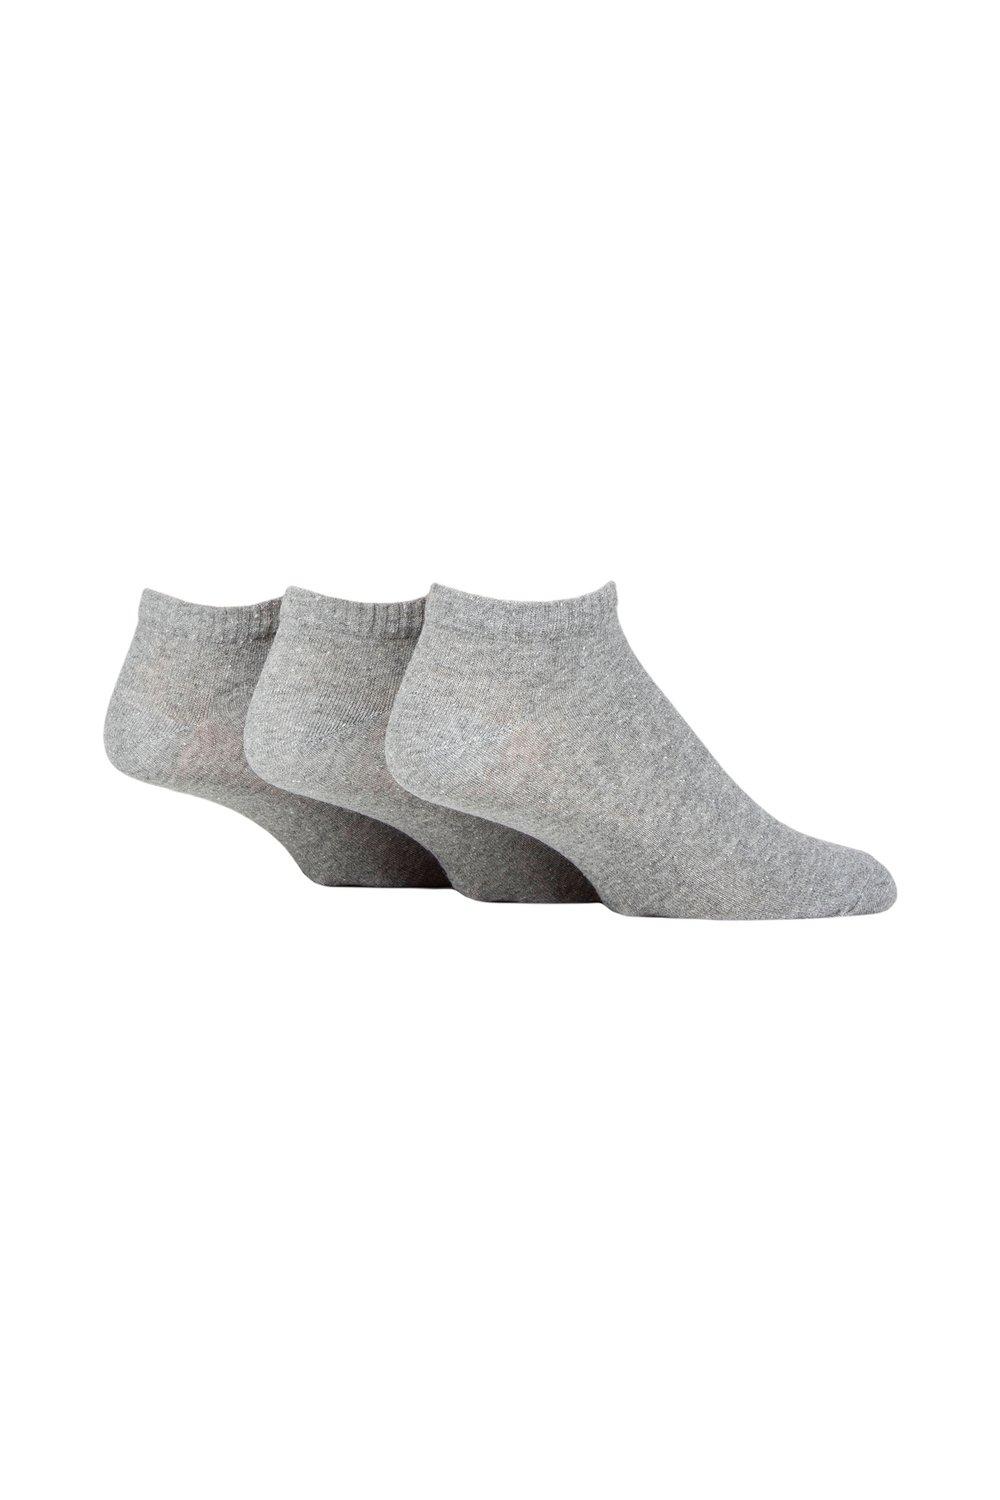 3 Pair 100% Recycled Plain Cotton Sports Trainer Socks